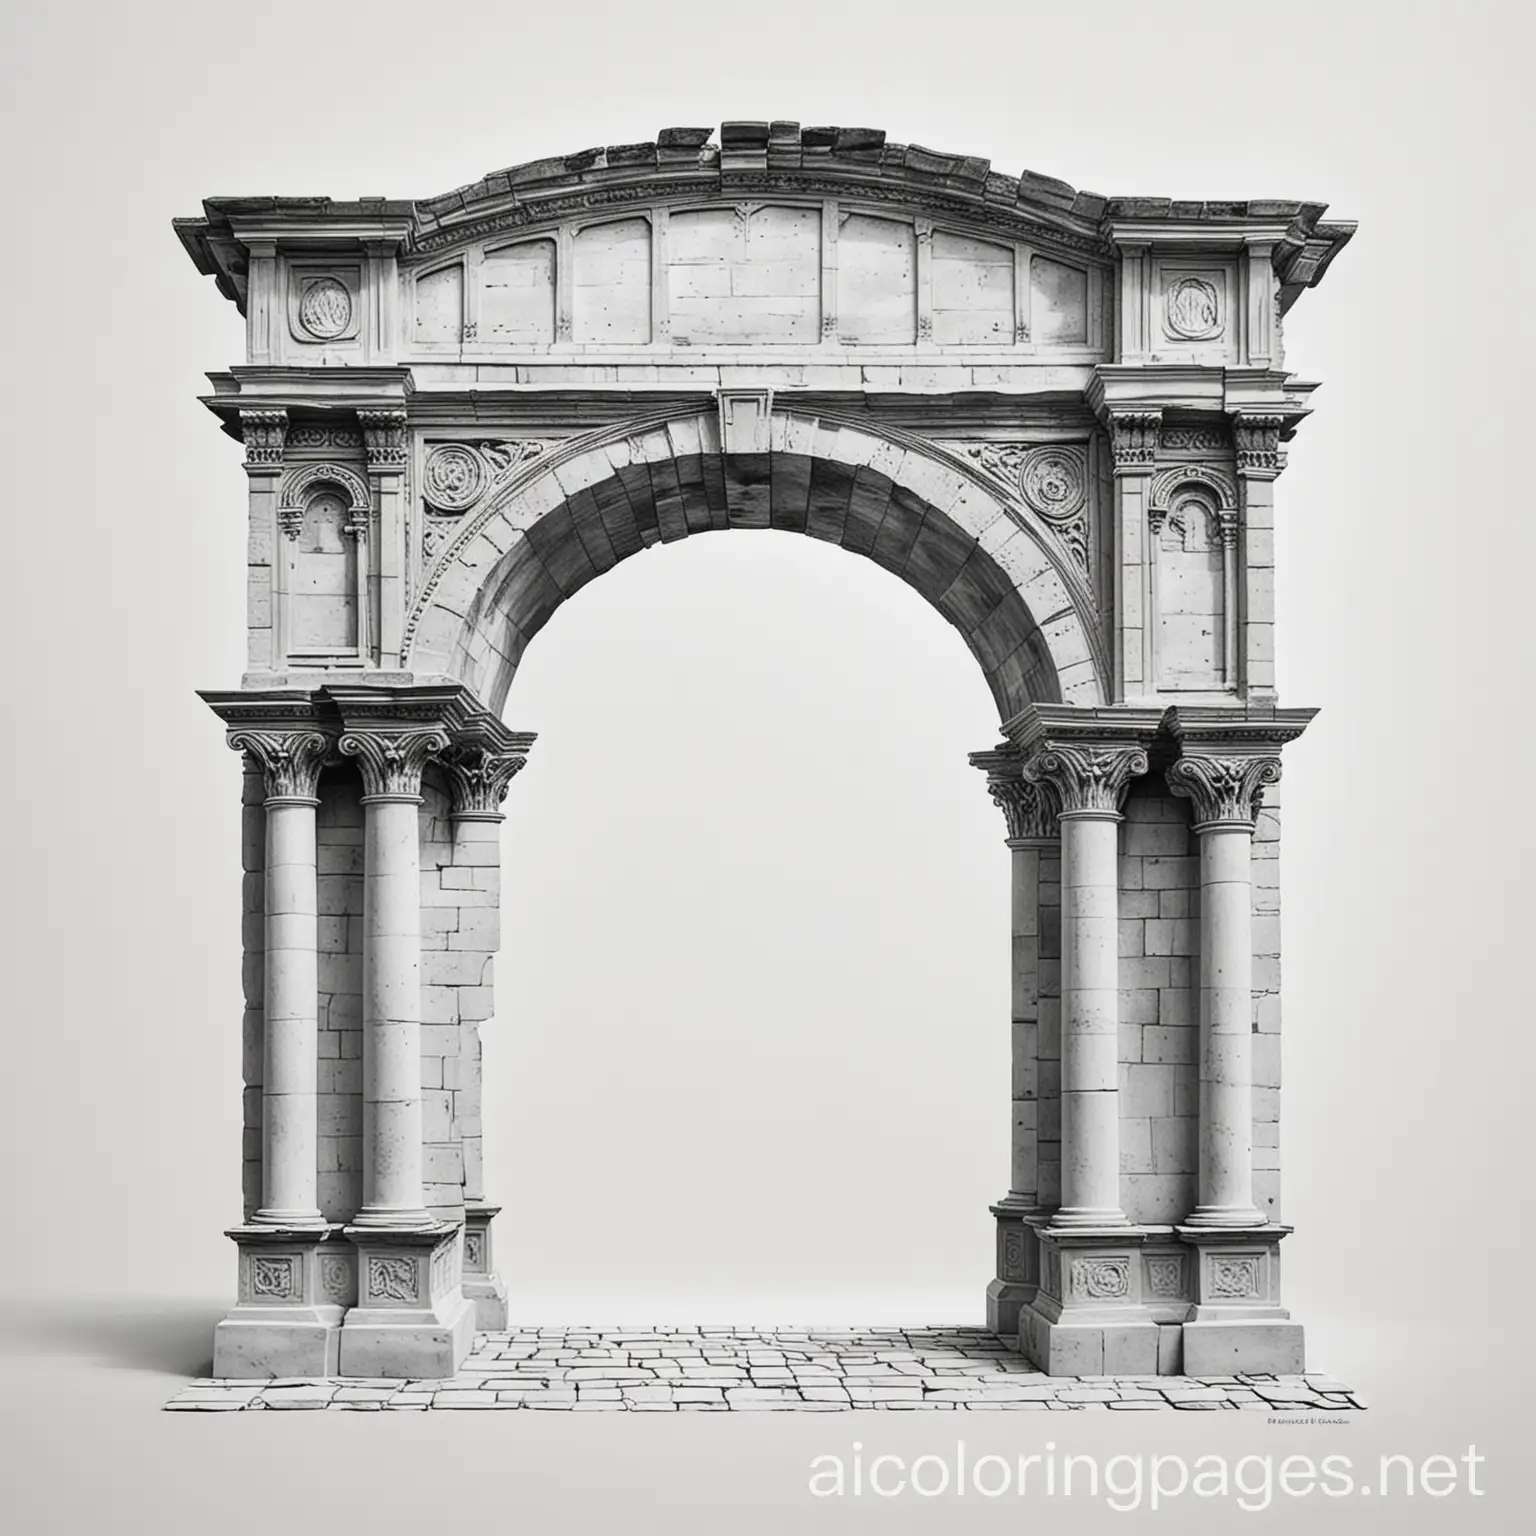 roman arch, roman buildings 1000 AD, Coloring Page, black and white, line art, white background, Simplicity, Ample White Space. The background of the coloring page is plain white to make it easy for young children to color within the lines. The outlines of all the subjects are easy to distinguish, making it simple for kids to color without too much difficulty